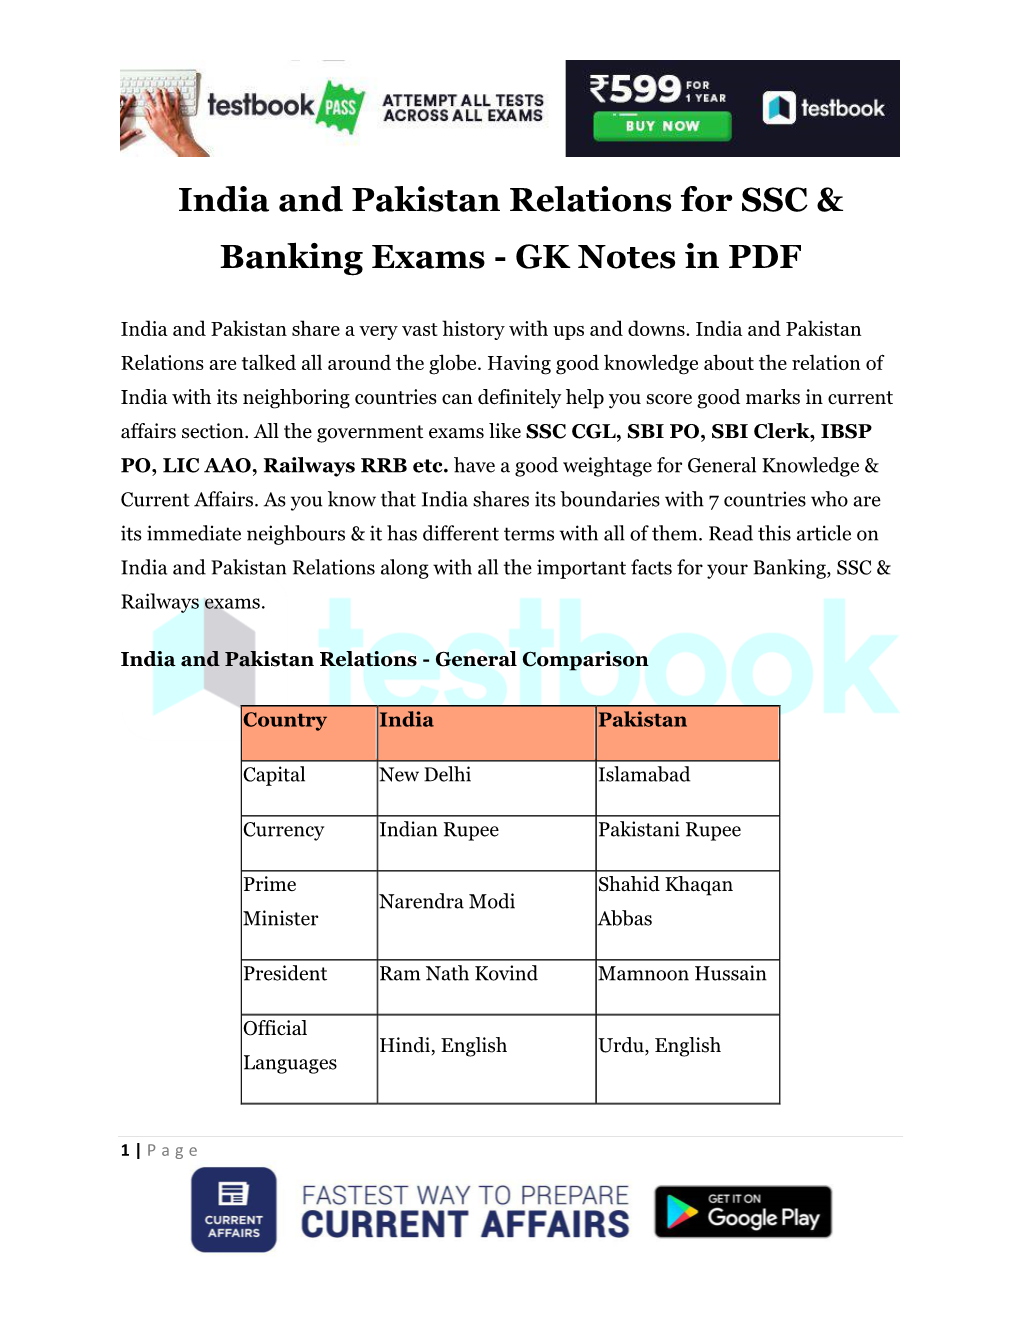 India and Pakistan Relations for SSC & Banking Exams